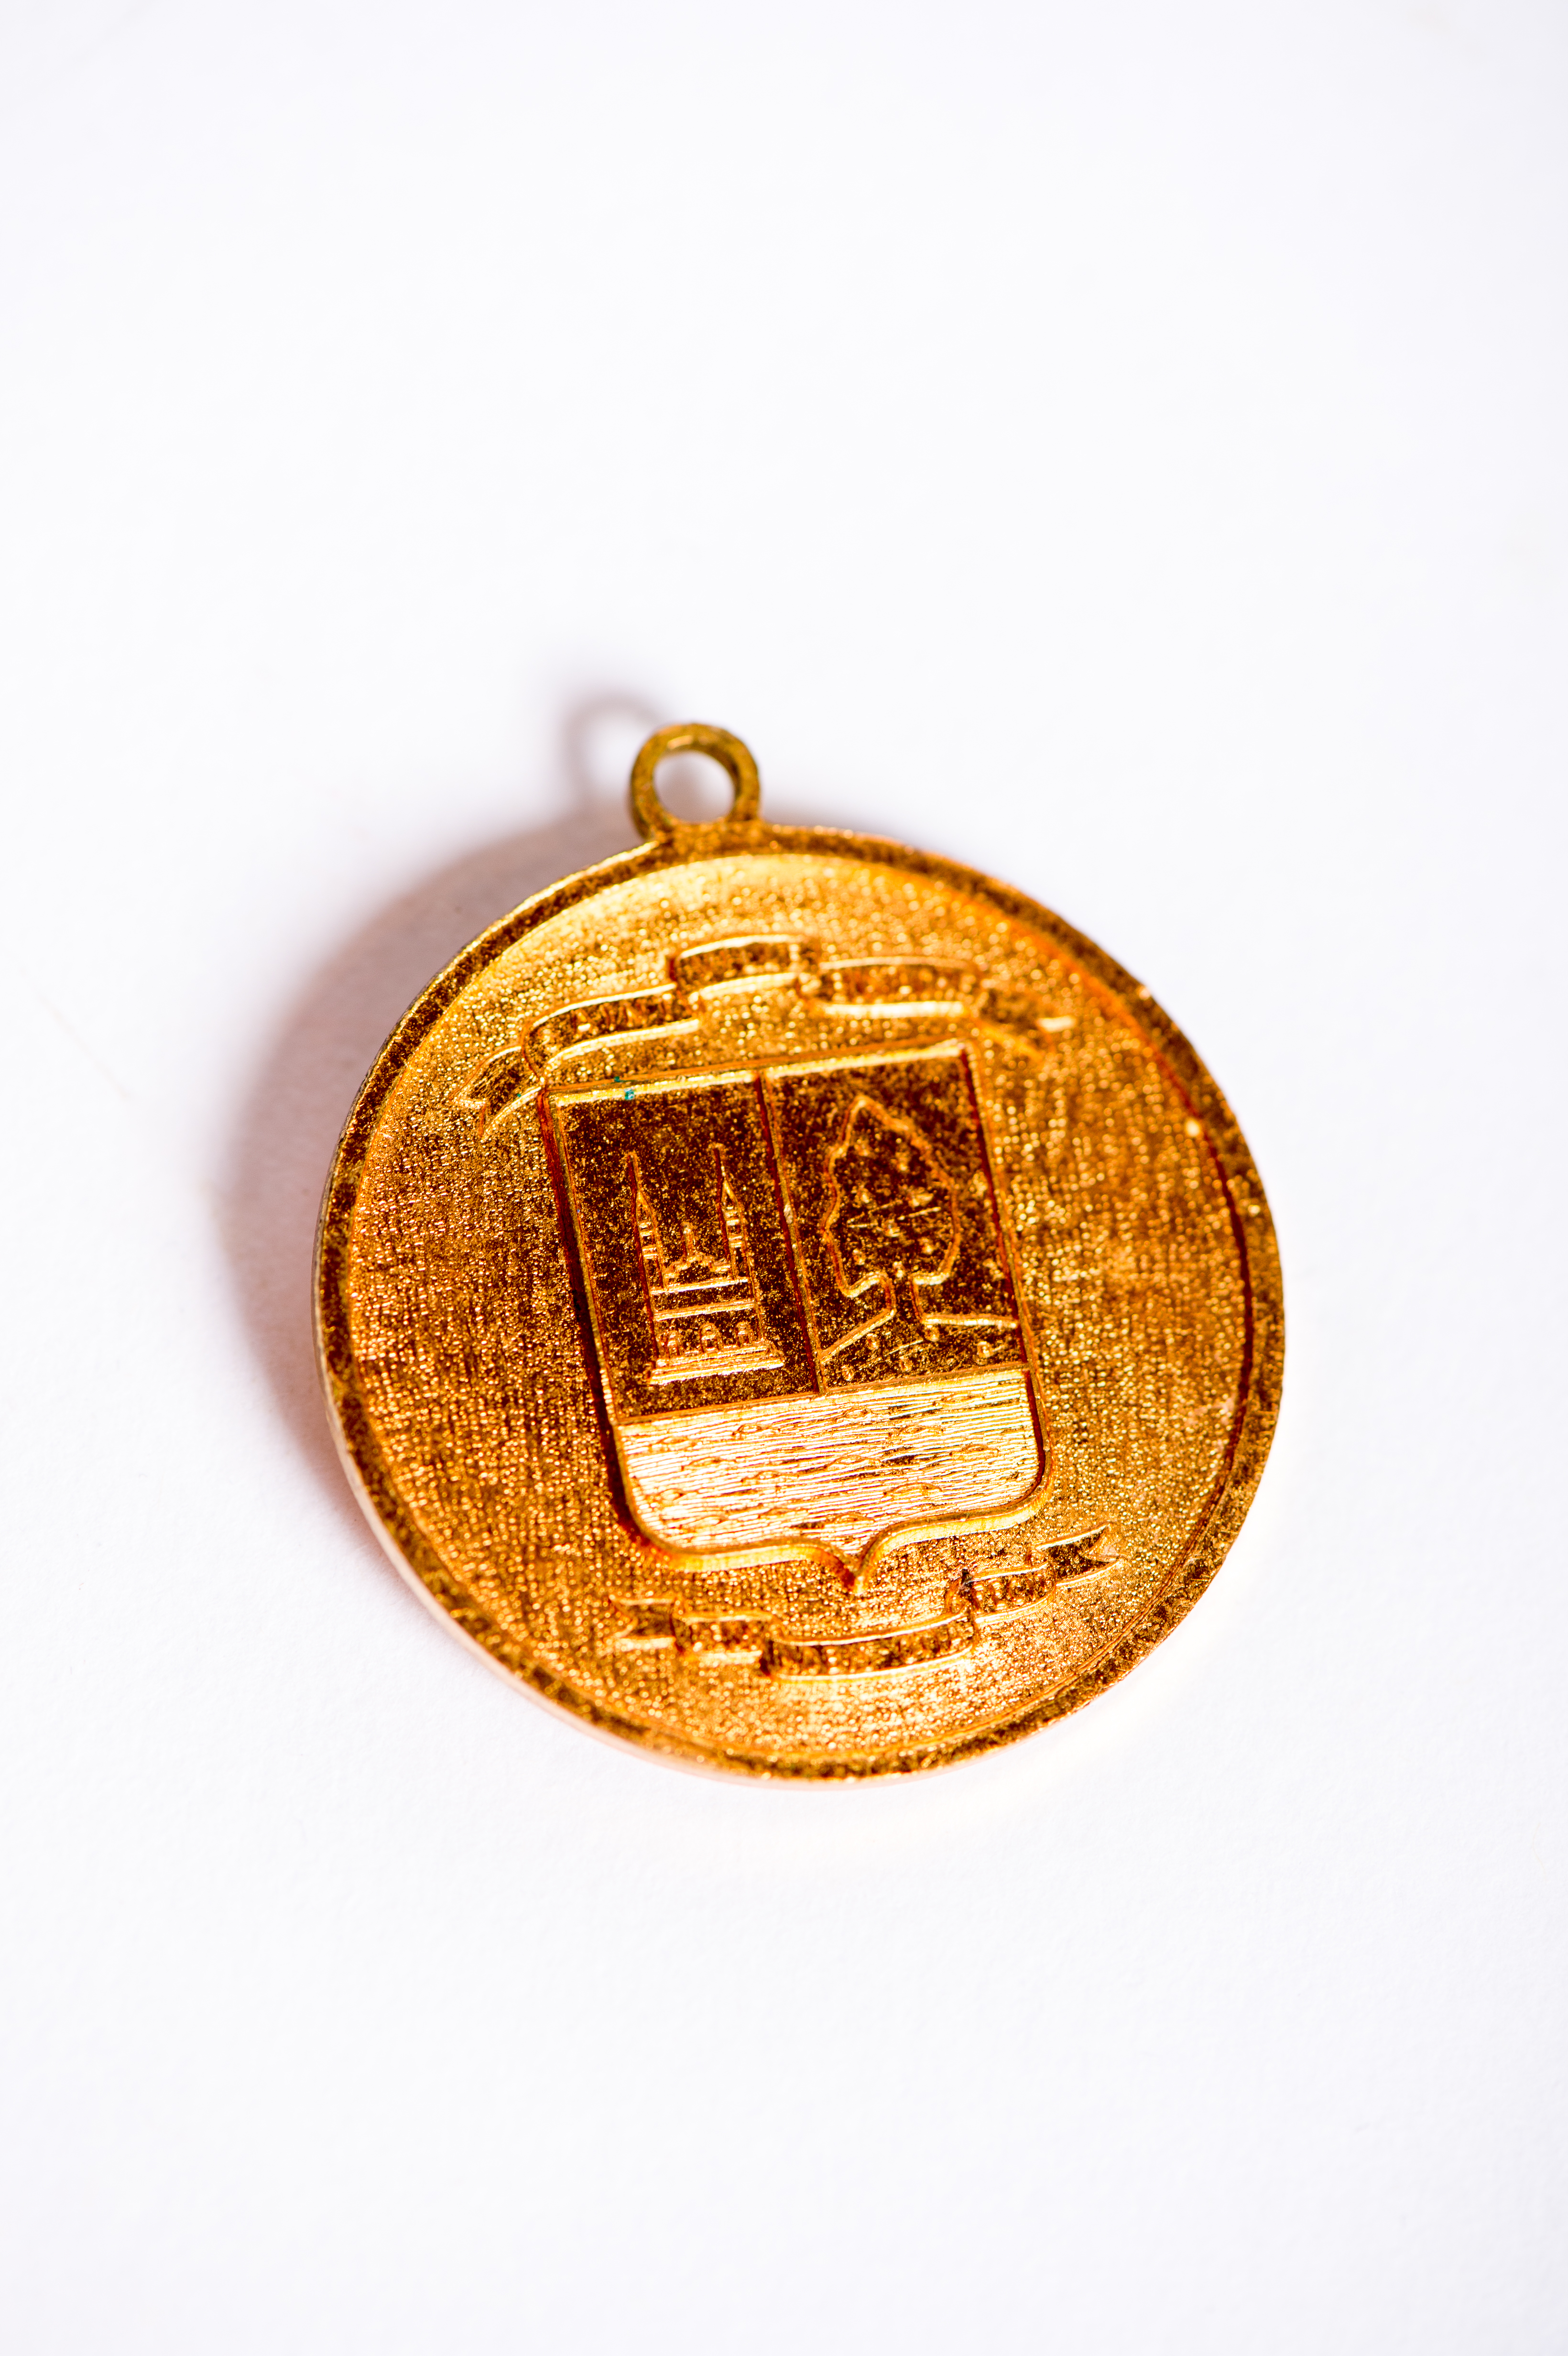 Photograph of a gold-coloured medal of honour on a white background, showing the coat of arms of the City of Saint-Eustache: a church, an oak and a river.